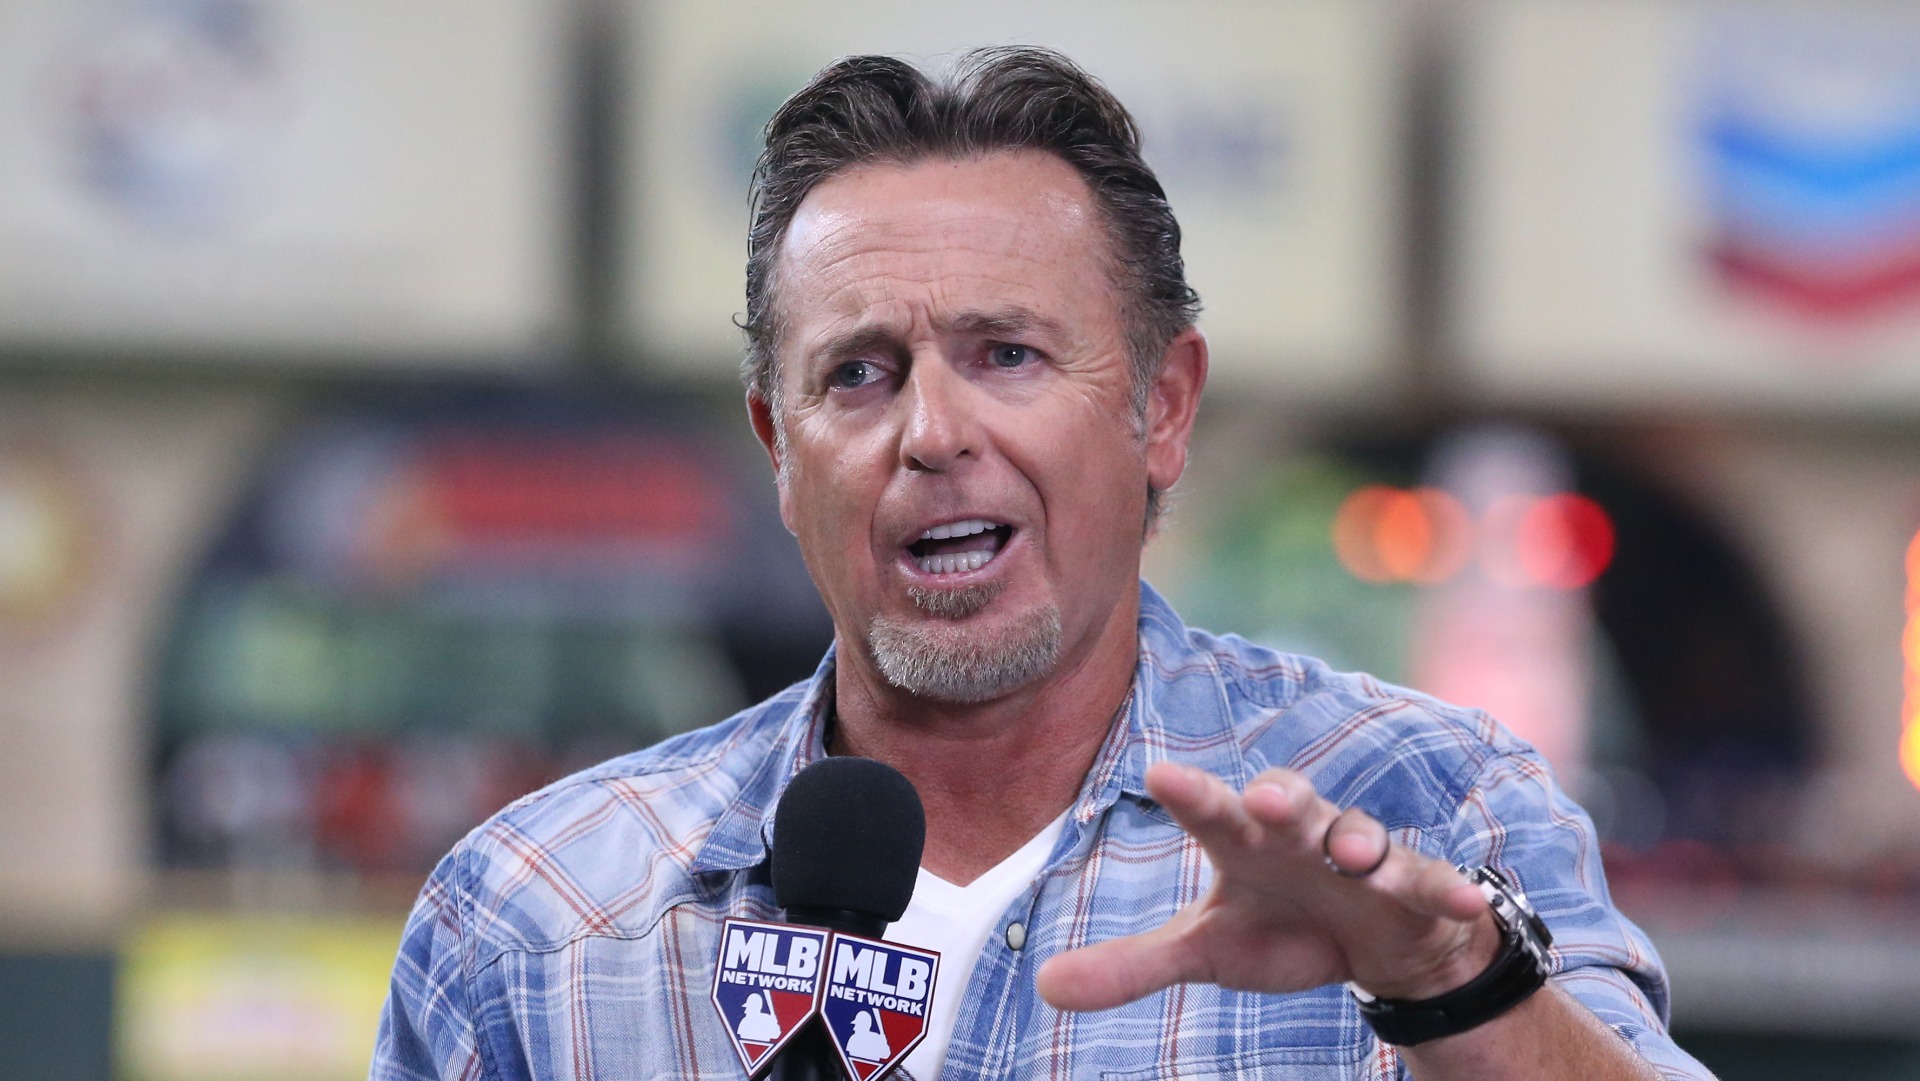 Kevin Millar Has 'Cowboy Up' Message For Celtics Before Game 5